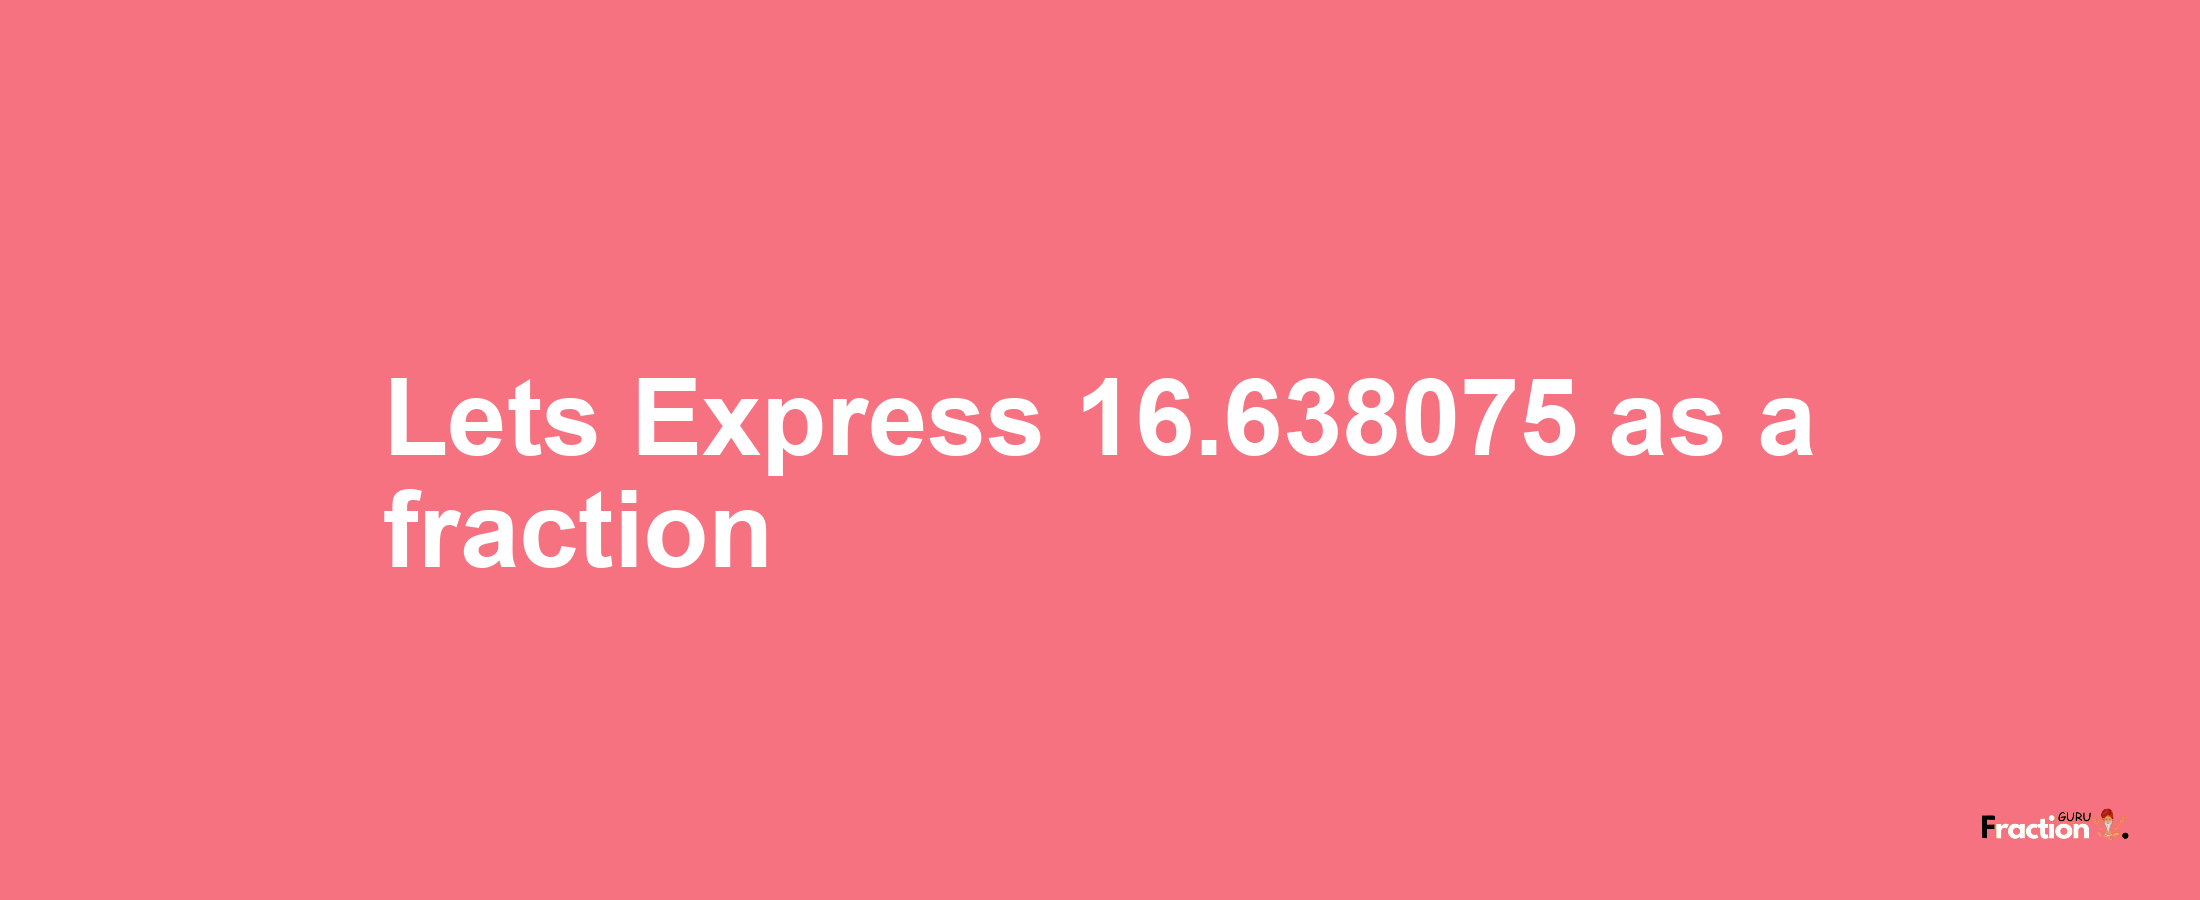 Lets Express 16.638075 as afraction